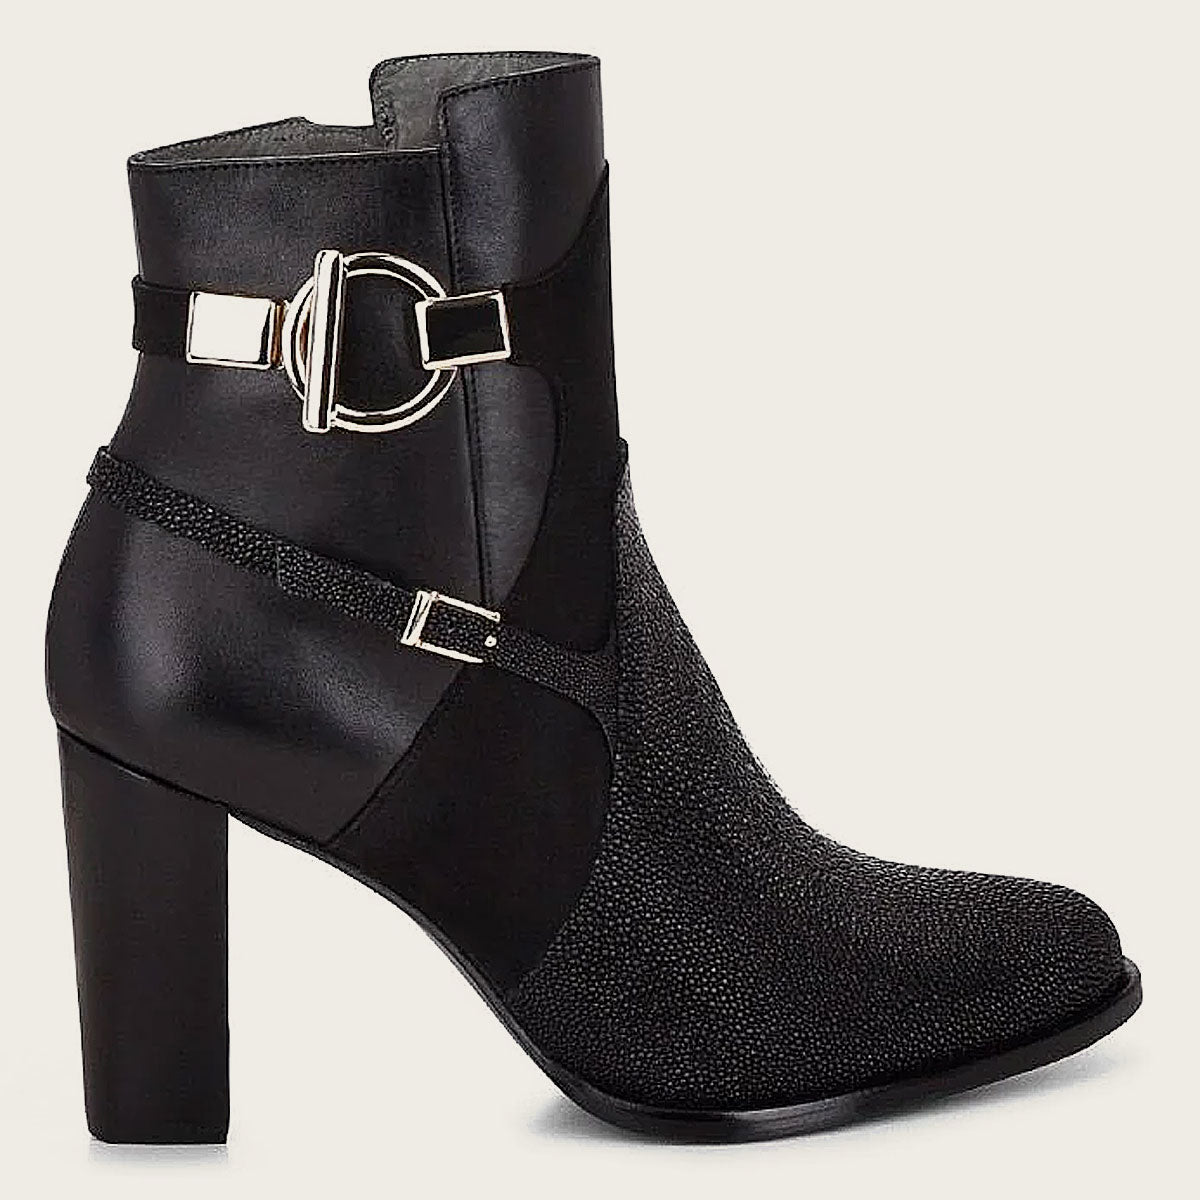 Black ankle boots in genuine stingray leather